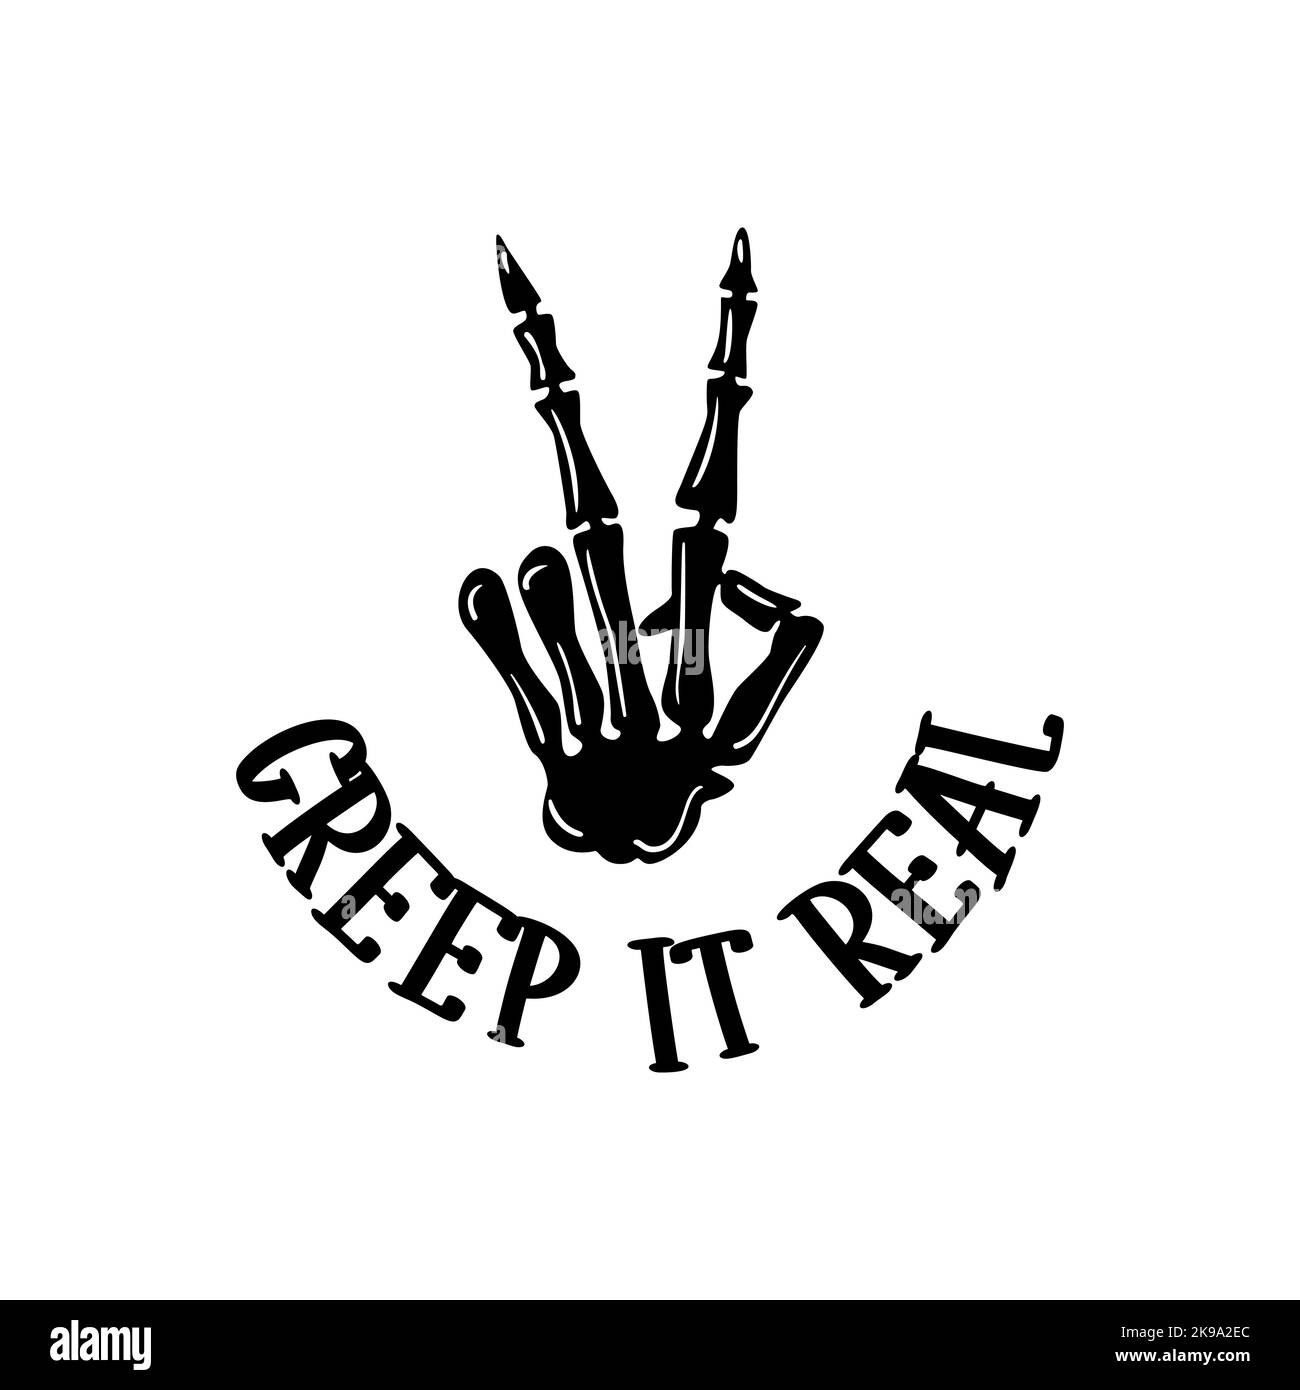 Skeleton hand with Halloween quote Creep it Real. Peace hand sign. Halloween party template for home decoration, laser cut, crafting. Vector Stock Vector